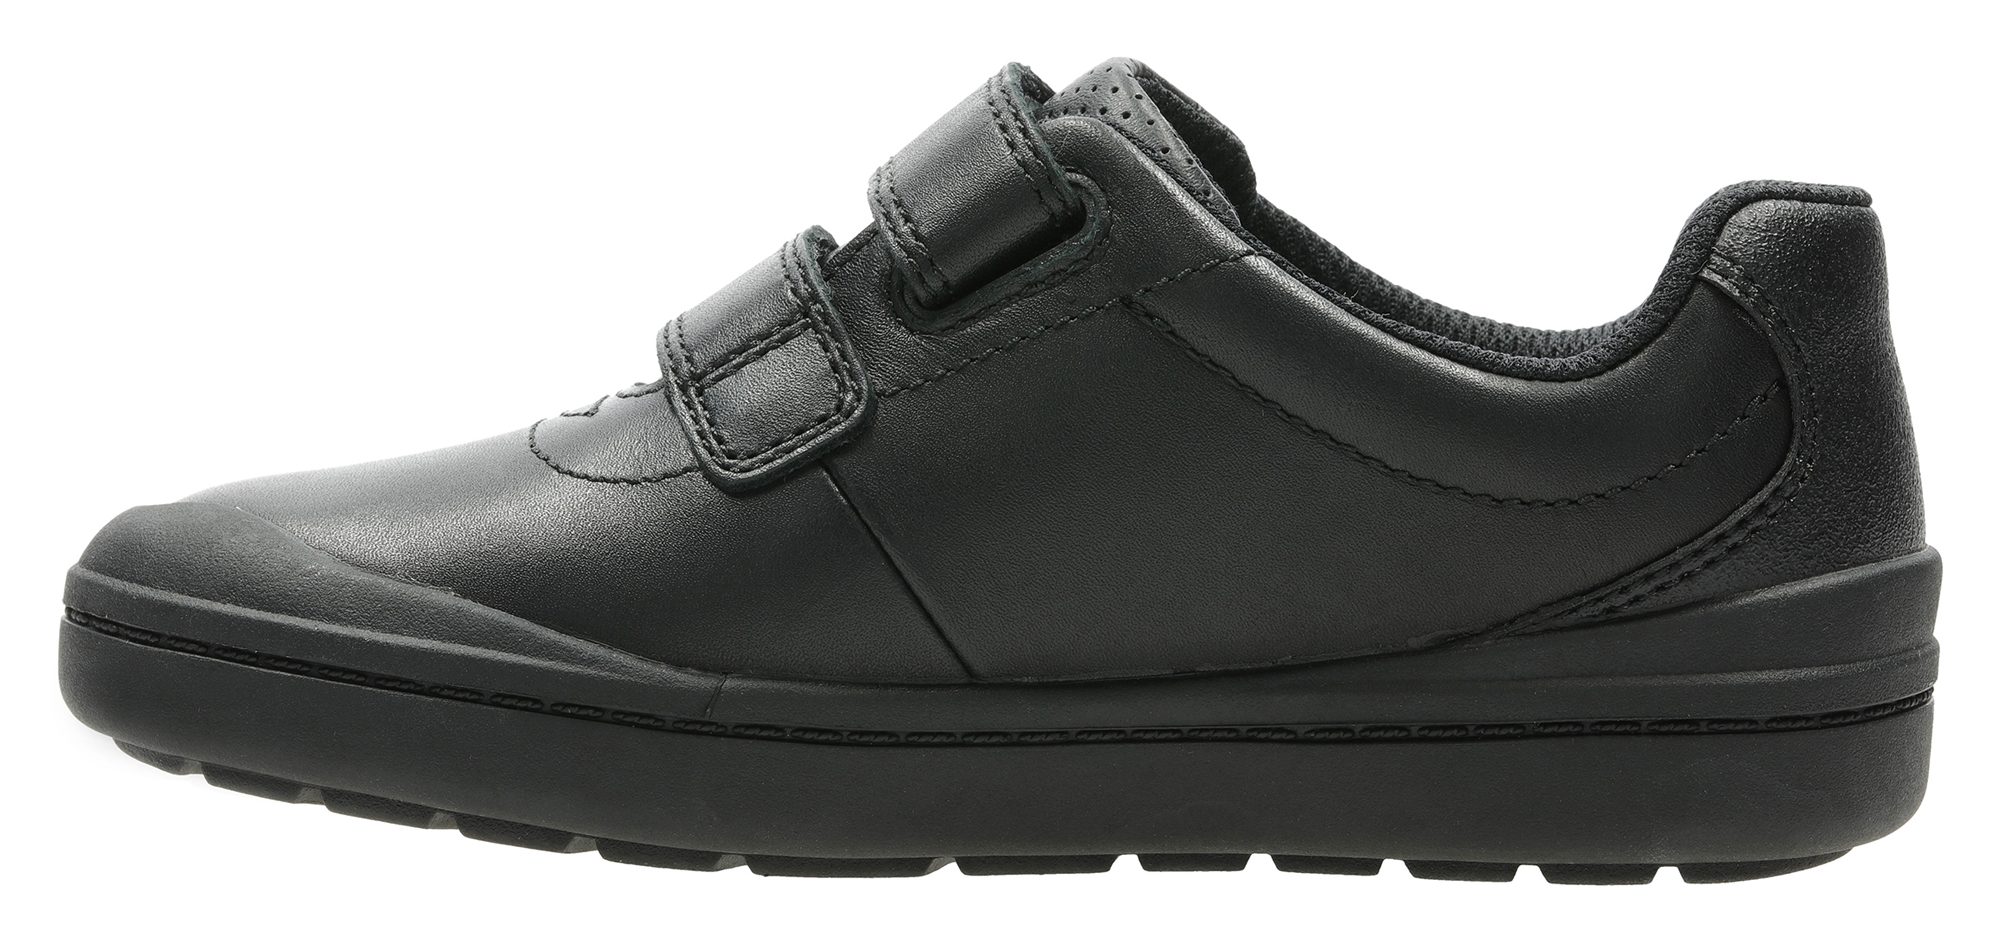 Clarks Rock Play Toddler Black Leather 26141557 - Boys School Shoes ...